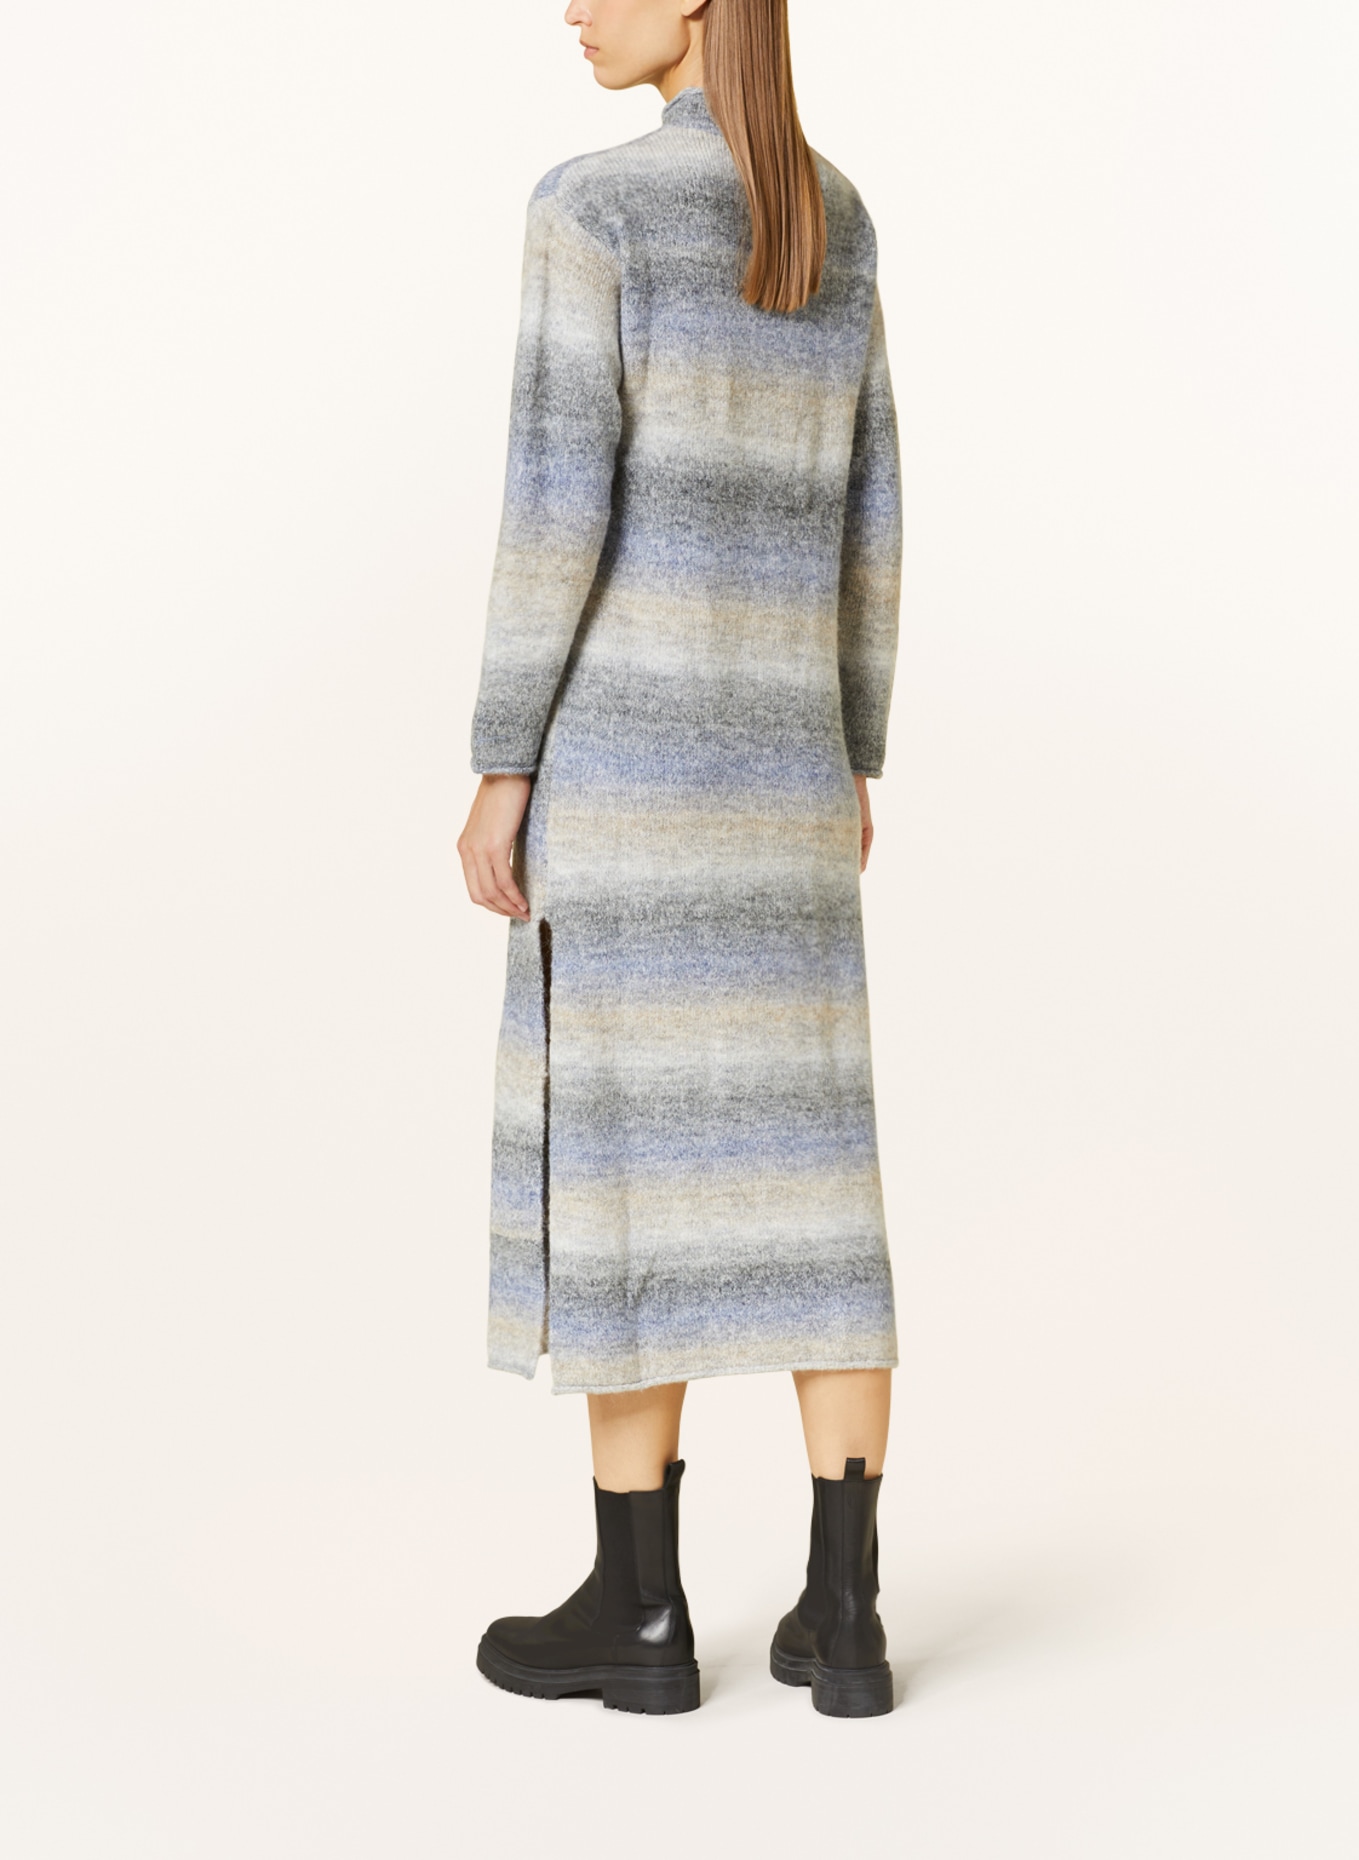 Pepe Jeans Knit dress EDITH, Color: BLUE GRAY/ LIGHT GRAY/ GRAY (Image 3)